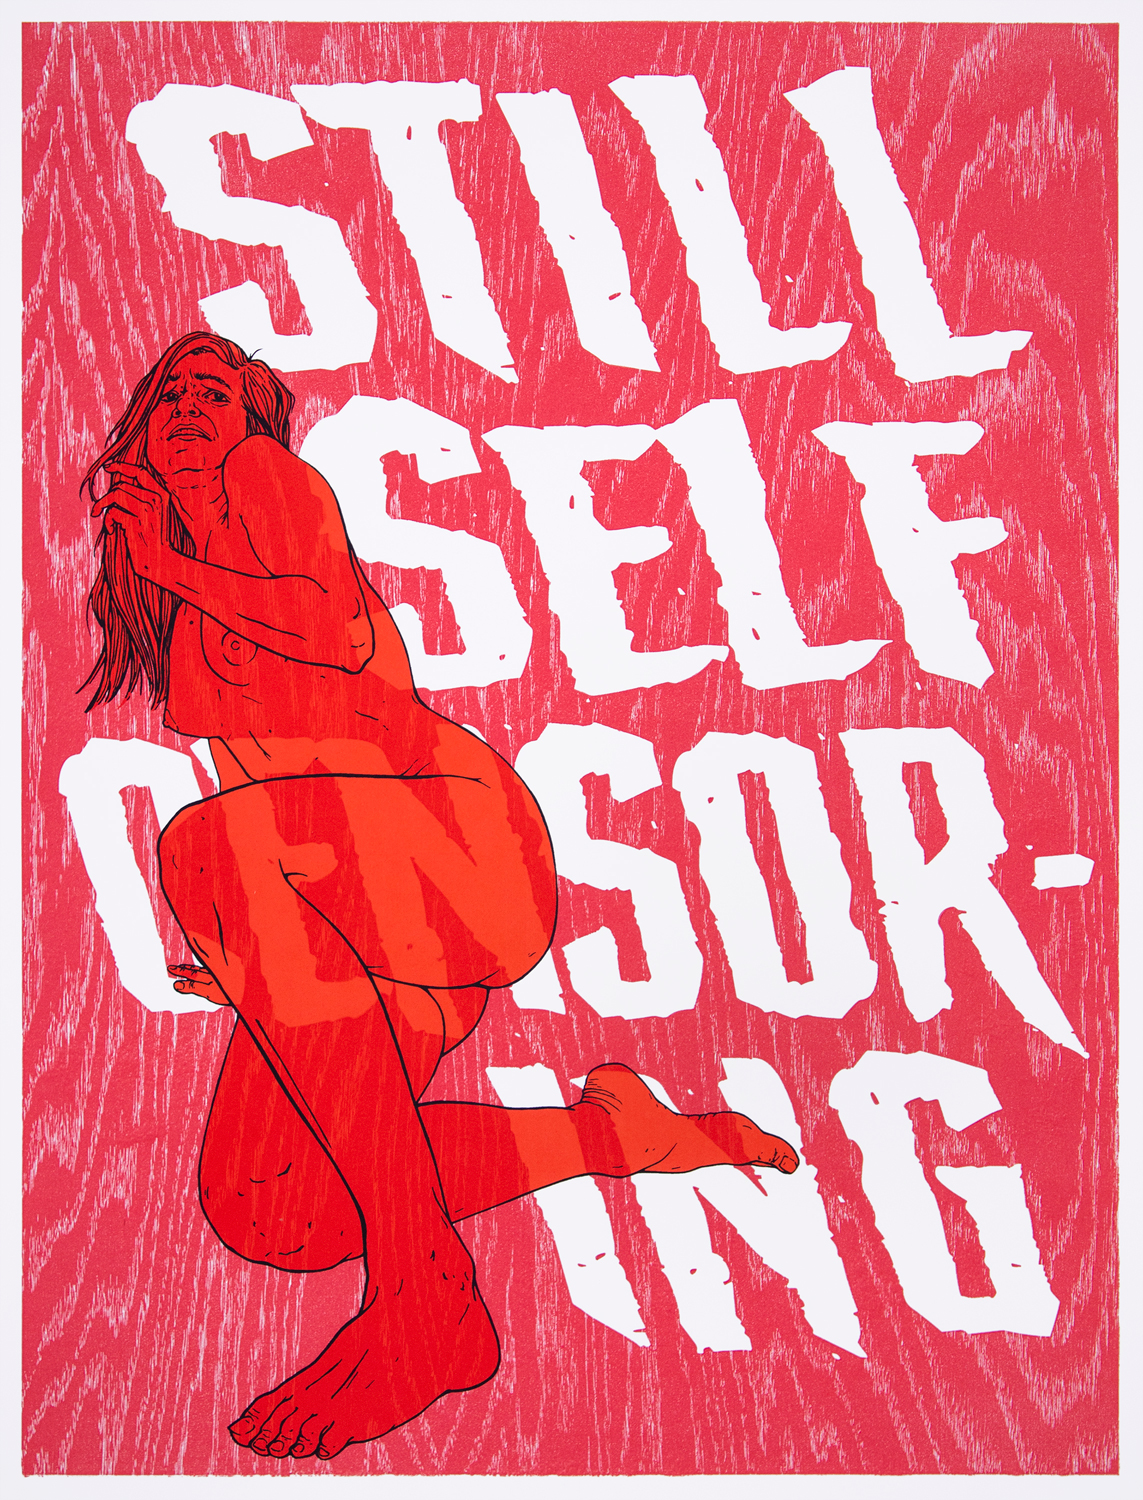 Still Self Censoring, screenprint & woodcut, 28 by 22 inches, 2021